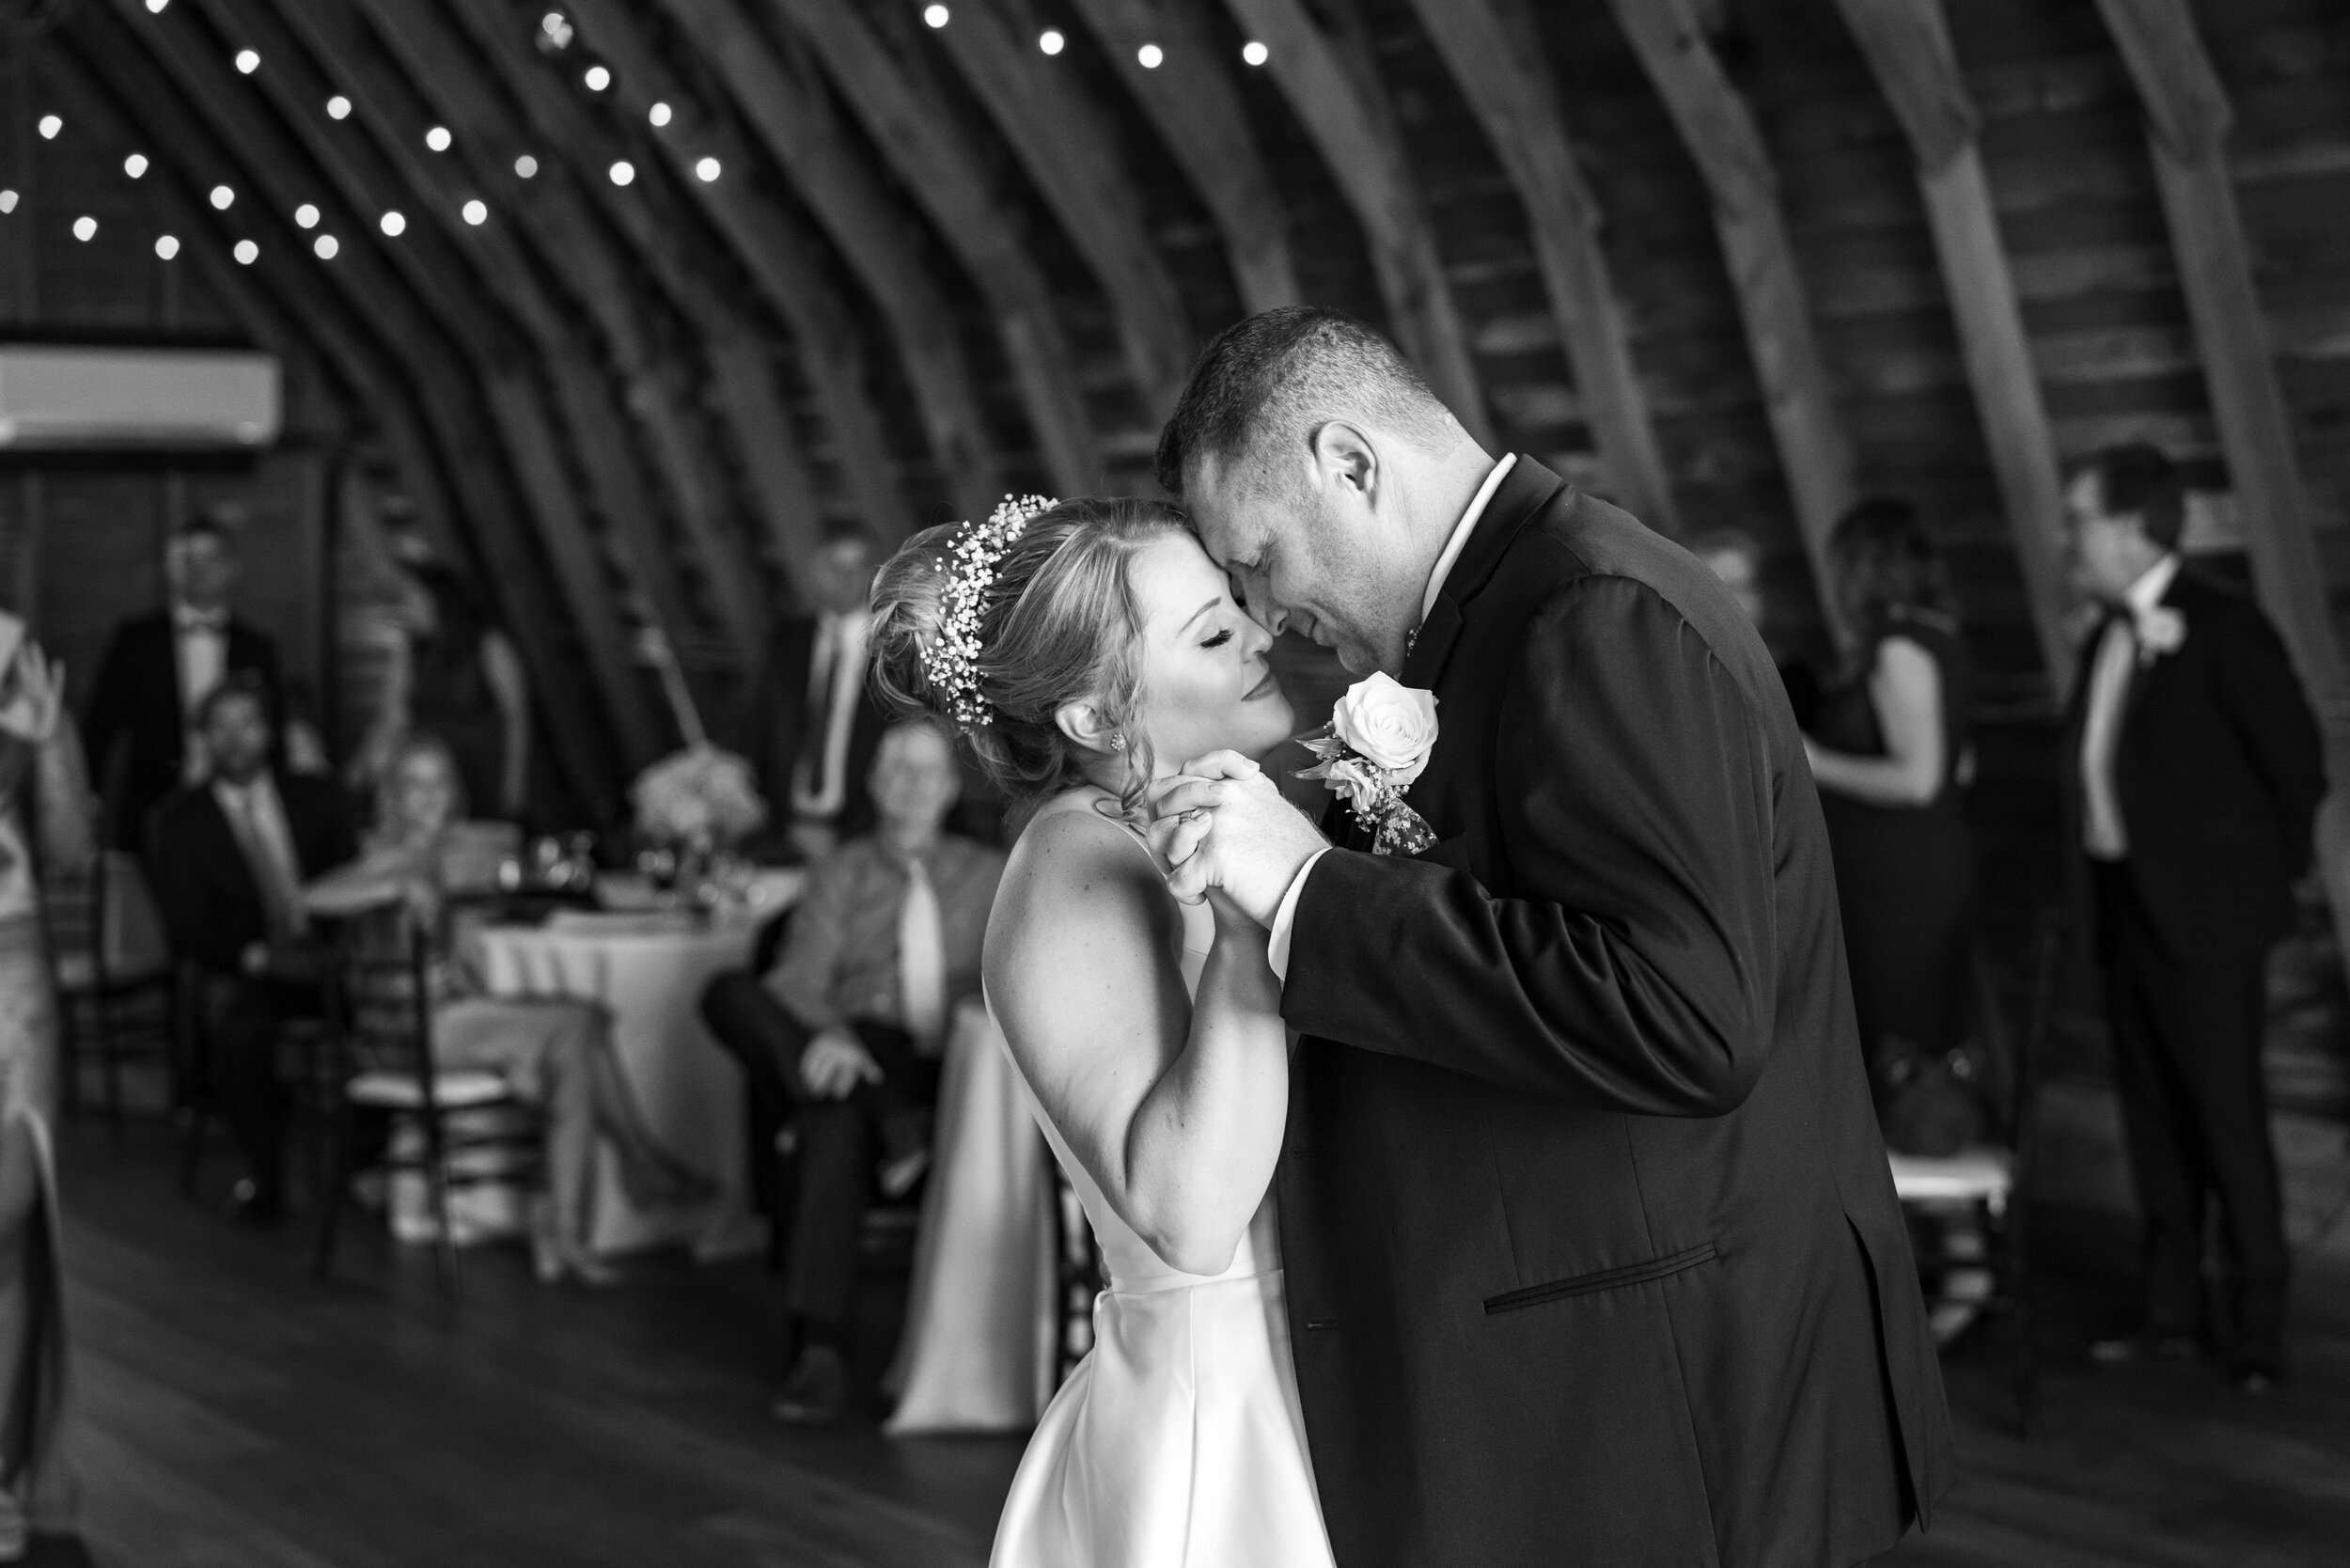 Bride and groom first dance in black and white upstairs in the barn at 48 Fields 